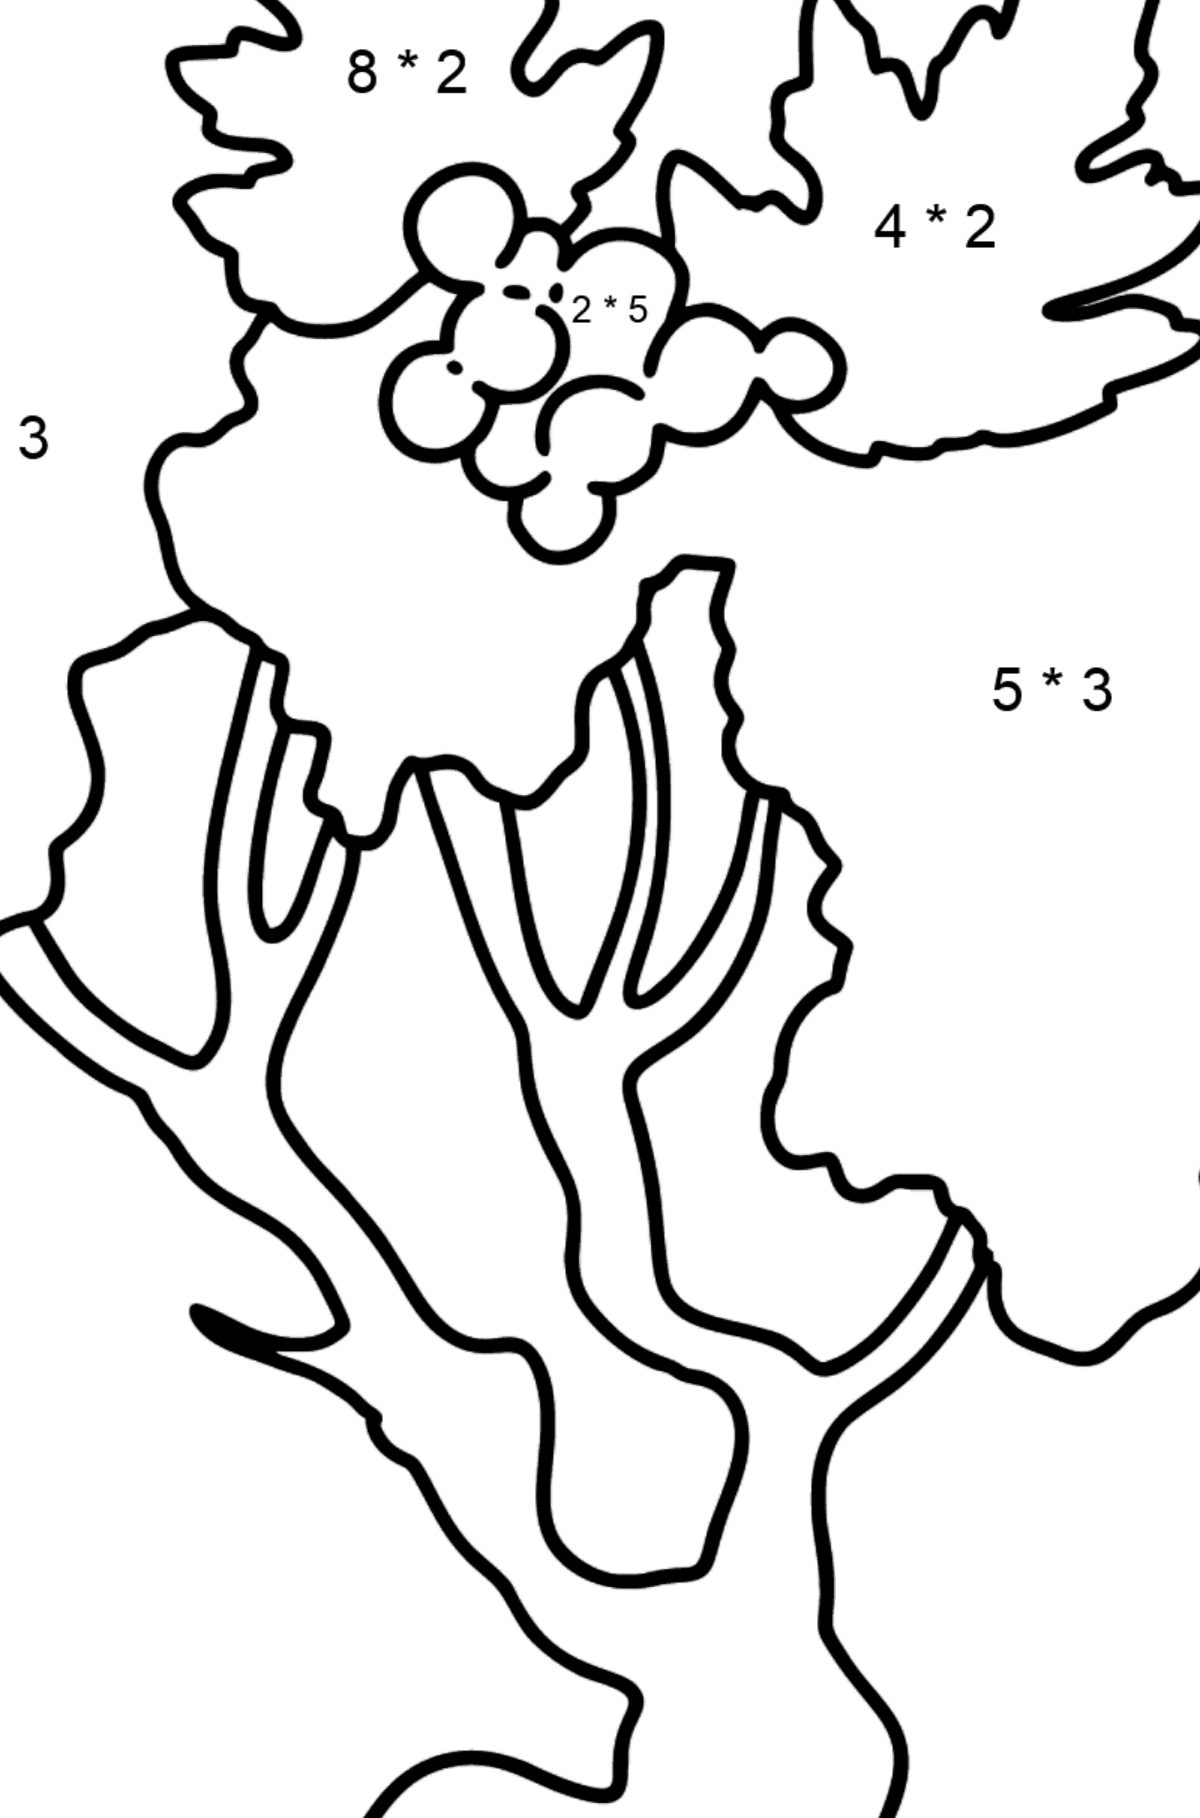 Hawthorn coloring page - Math Coloring - Multiplication for Kids